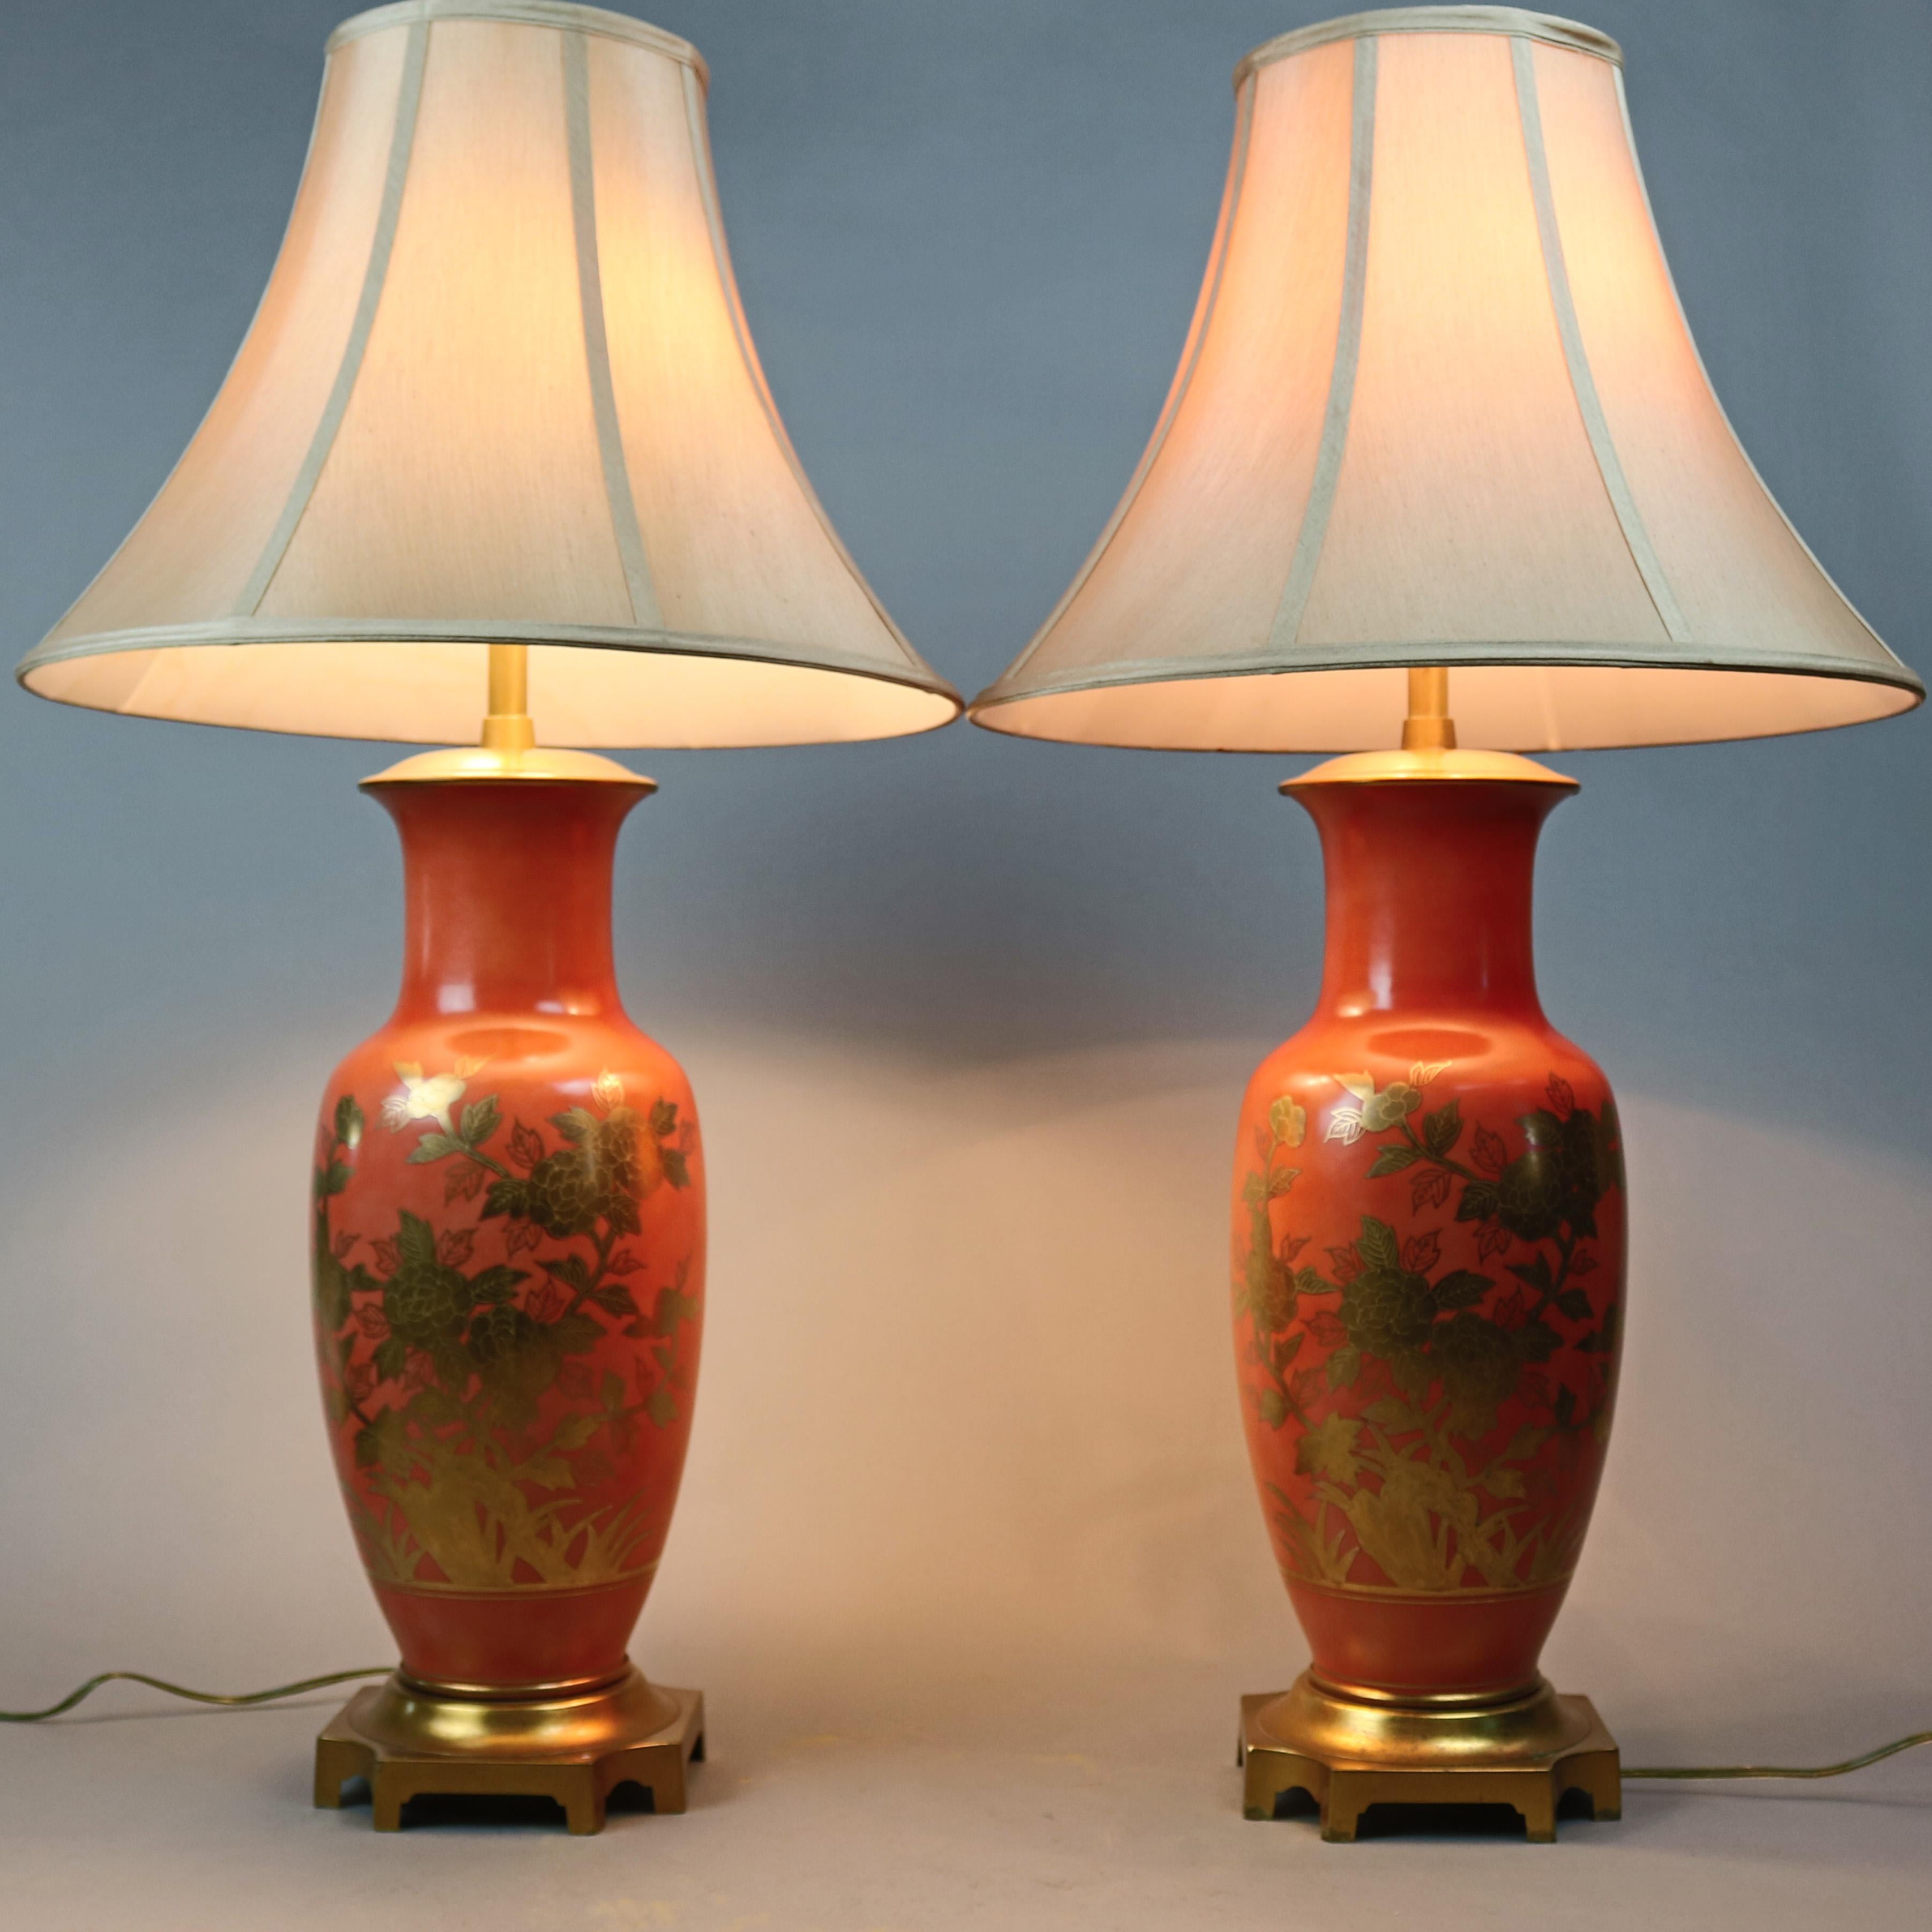 A vintage pair of Chinese double socket table lamps offer porcelain urn form base with gold gilt floral decoration, seated on gilt metal footed bases, 20th century

***DELIVERY NOTICE – Due to COVID-19 we have employed LIMITED-TO-NO-CONTACT